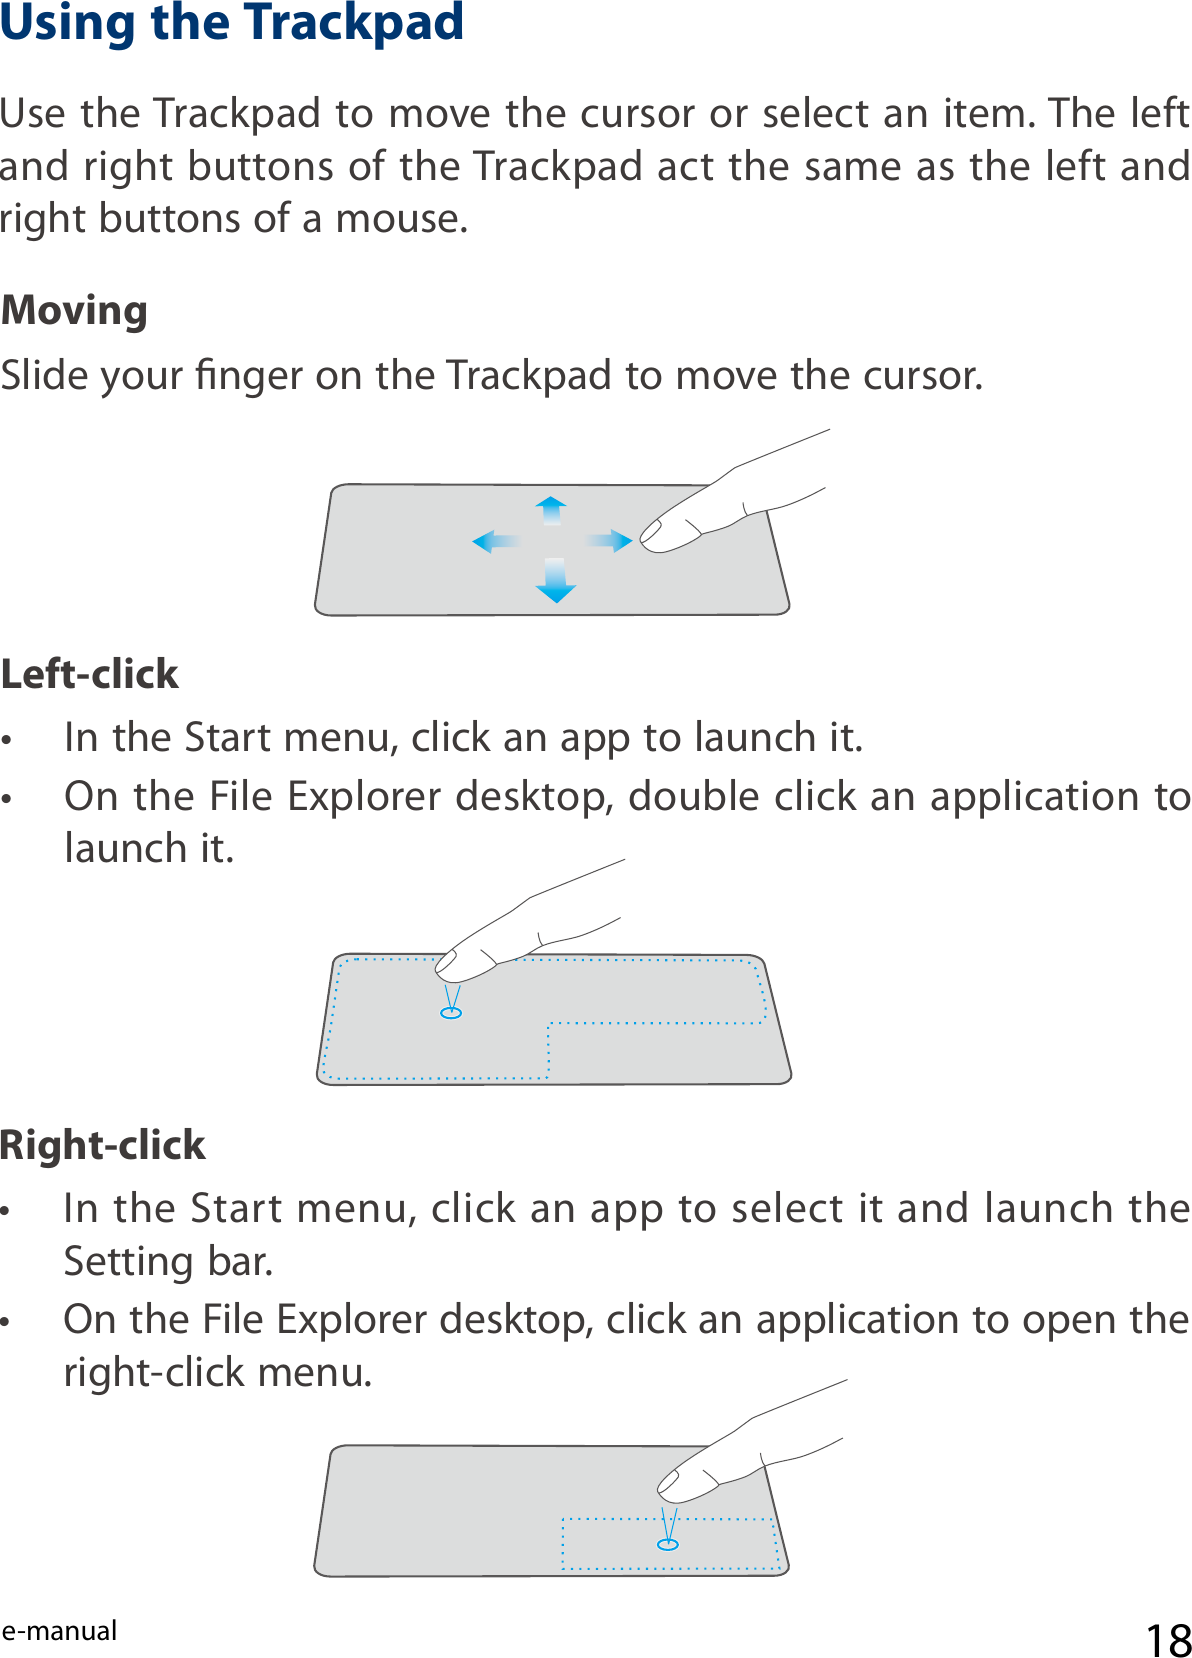 e-manual 18Right-clickUse the Trackpad to move the cursor or select an item. The left and right buttons of the Trackpad act the same as the  left and right buttons of a mouse.Slide your nger on the Trackpad to move the cursor.•  In the Start menu, click an app to launch it.•  On the File Explorer desktop, double click an application to launch it.MovingLeft-click•  In the Start menu, click an app to select it and launch the Setting bar.•  On the File Explorer desktop, click an application to open the right-click menu.Using the Trackpad